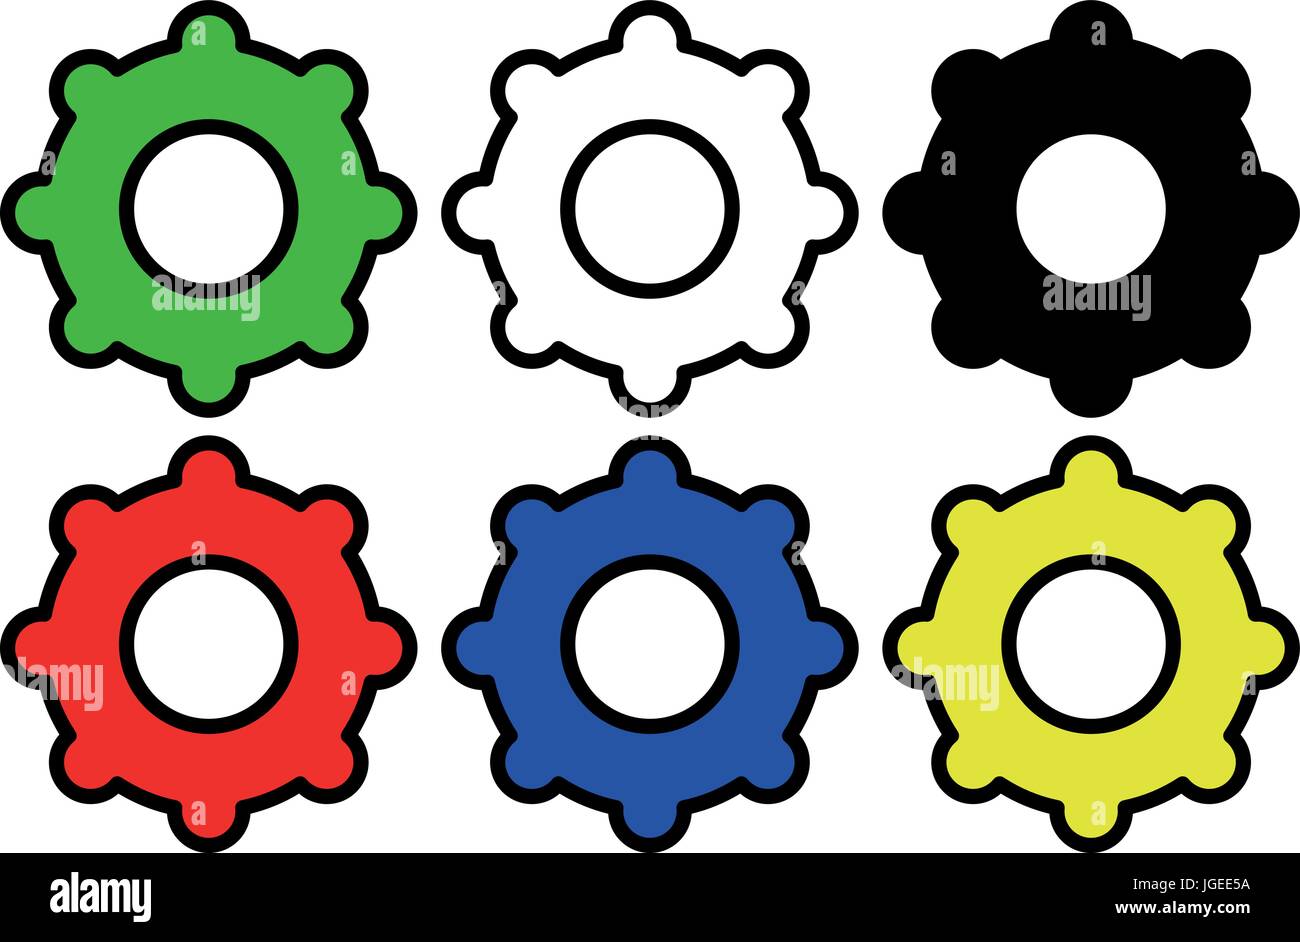 set of six gears for settings icon Stock Vector